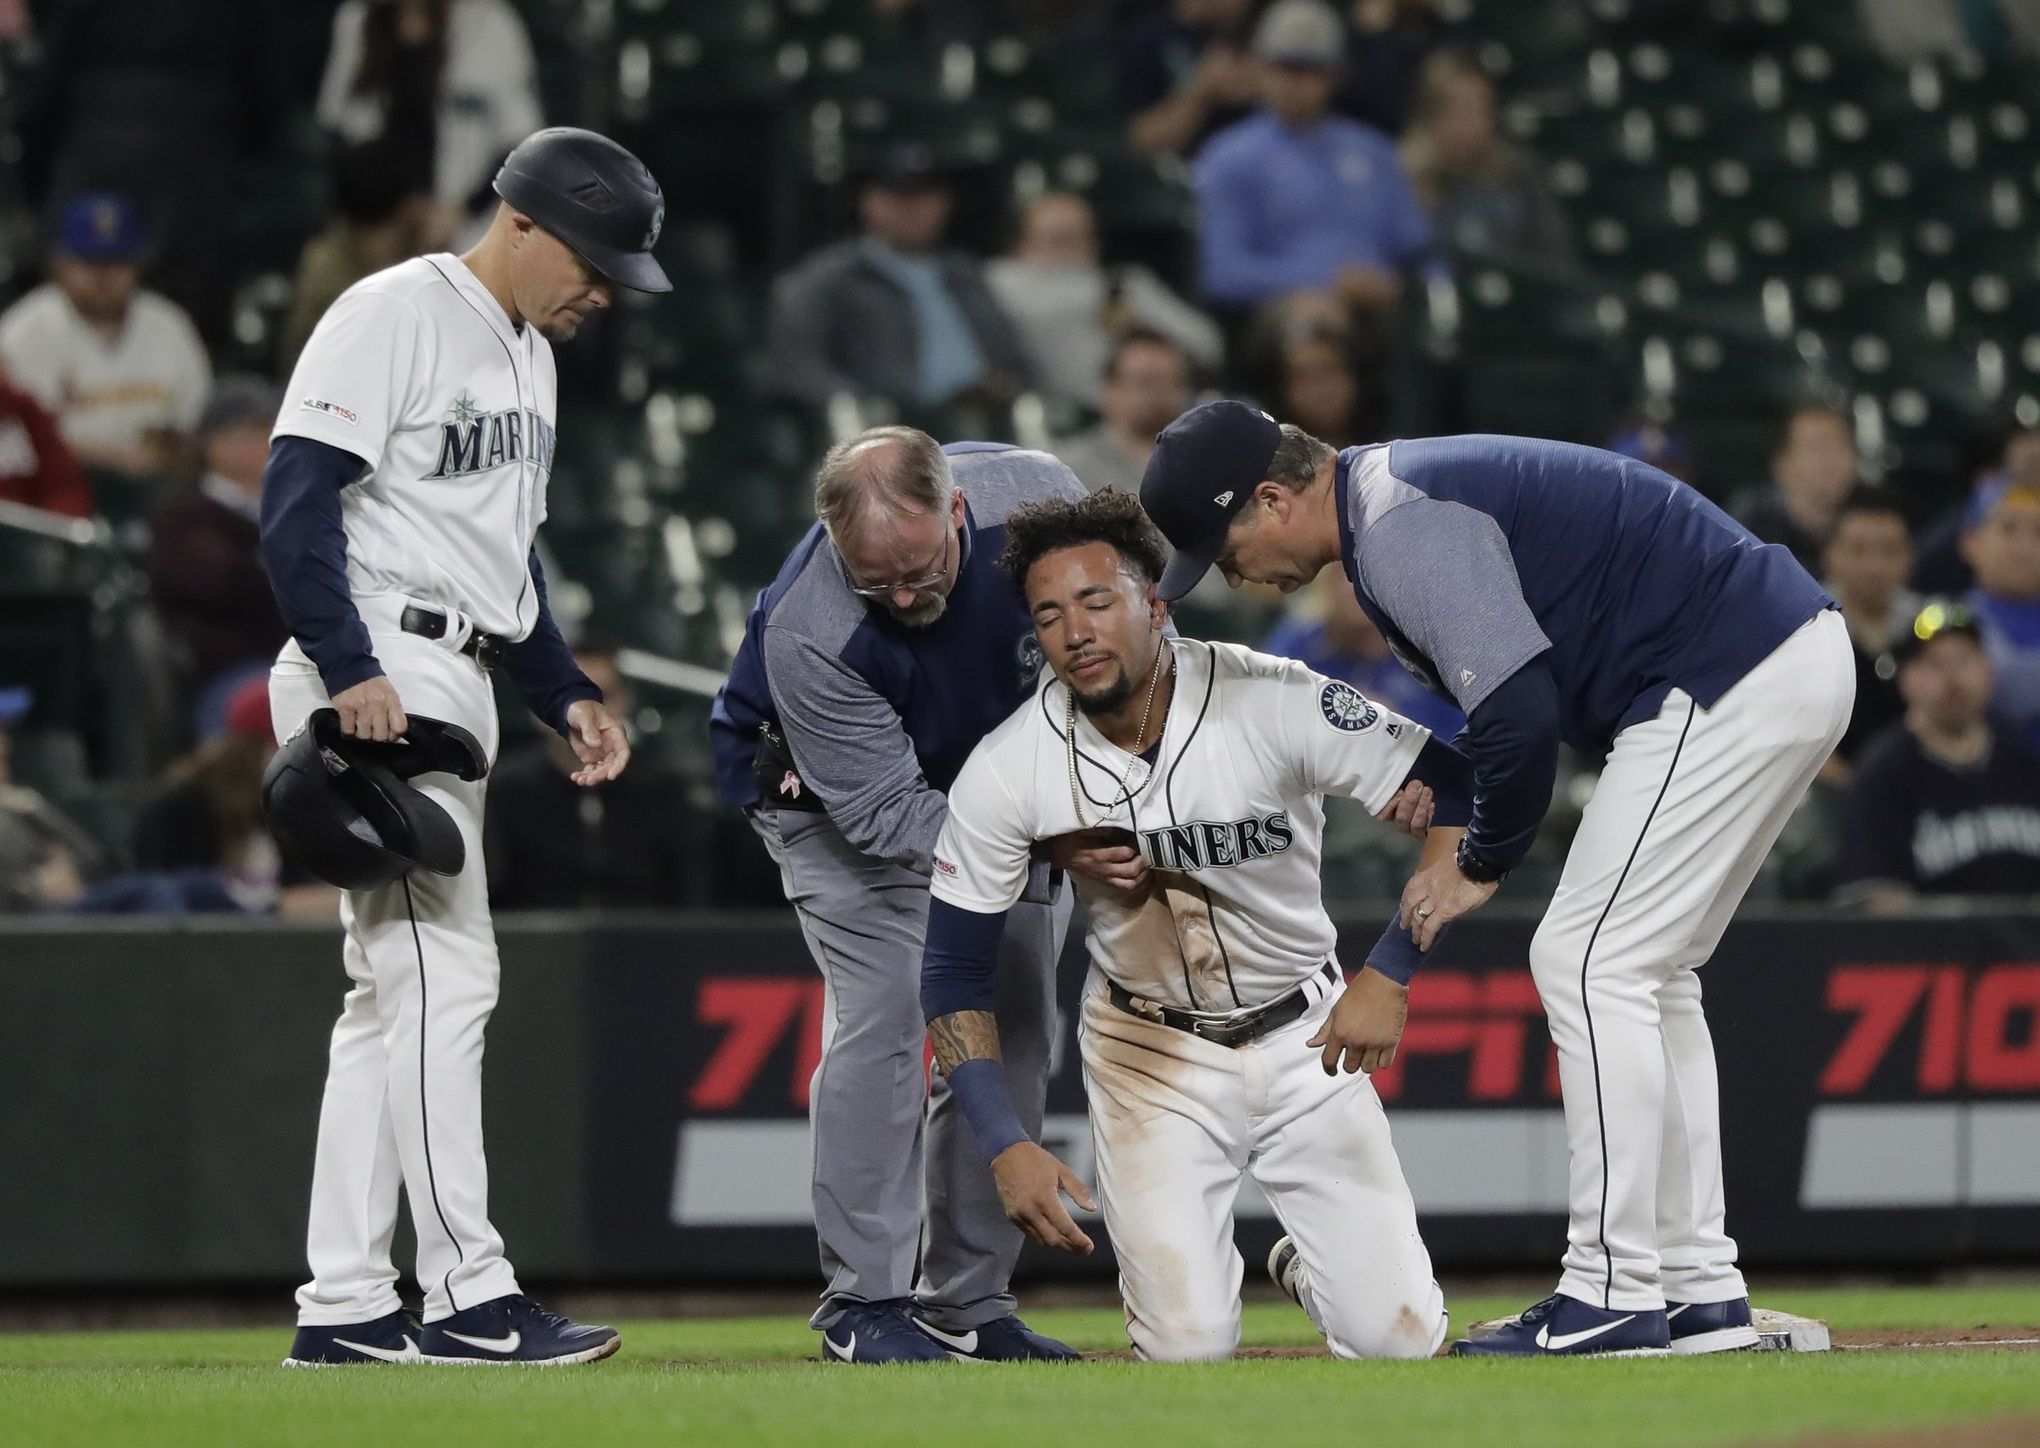 J.P. Crawford expected to miss 'a couple weeks,' but ankle injury